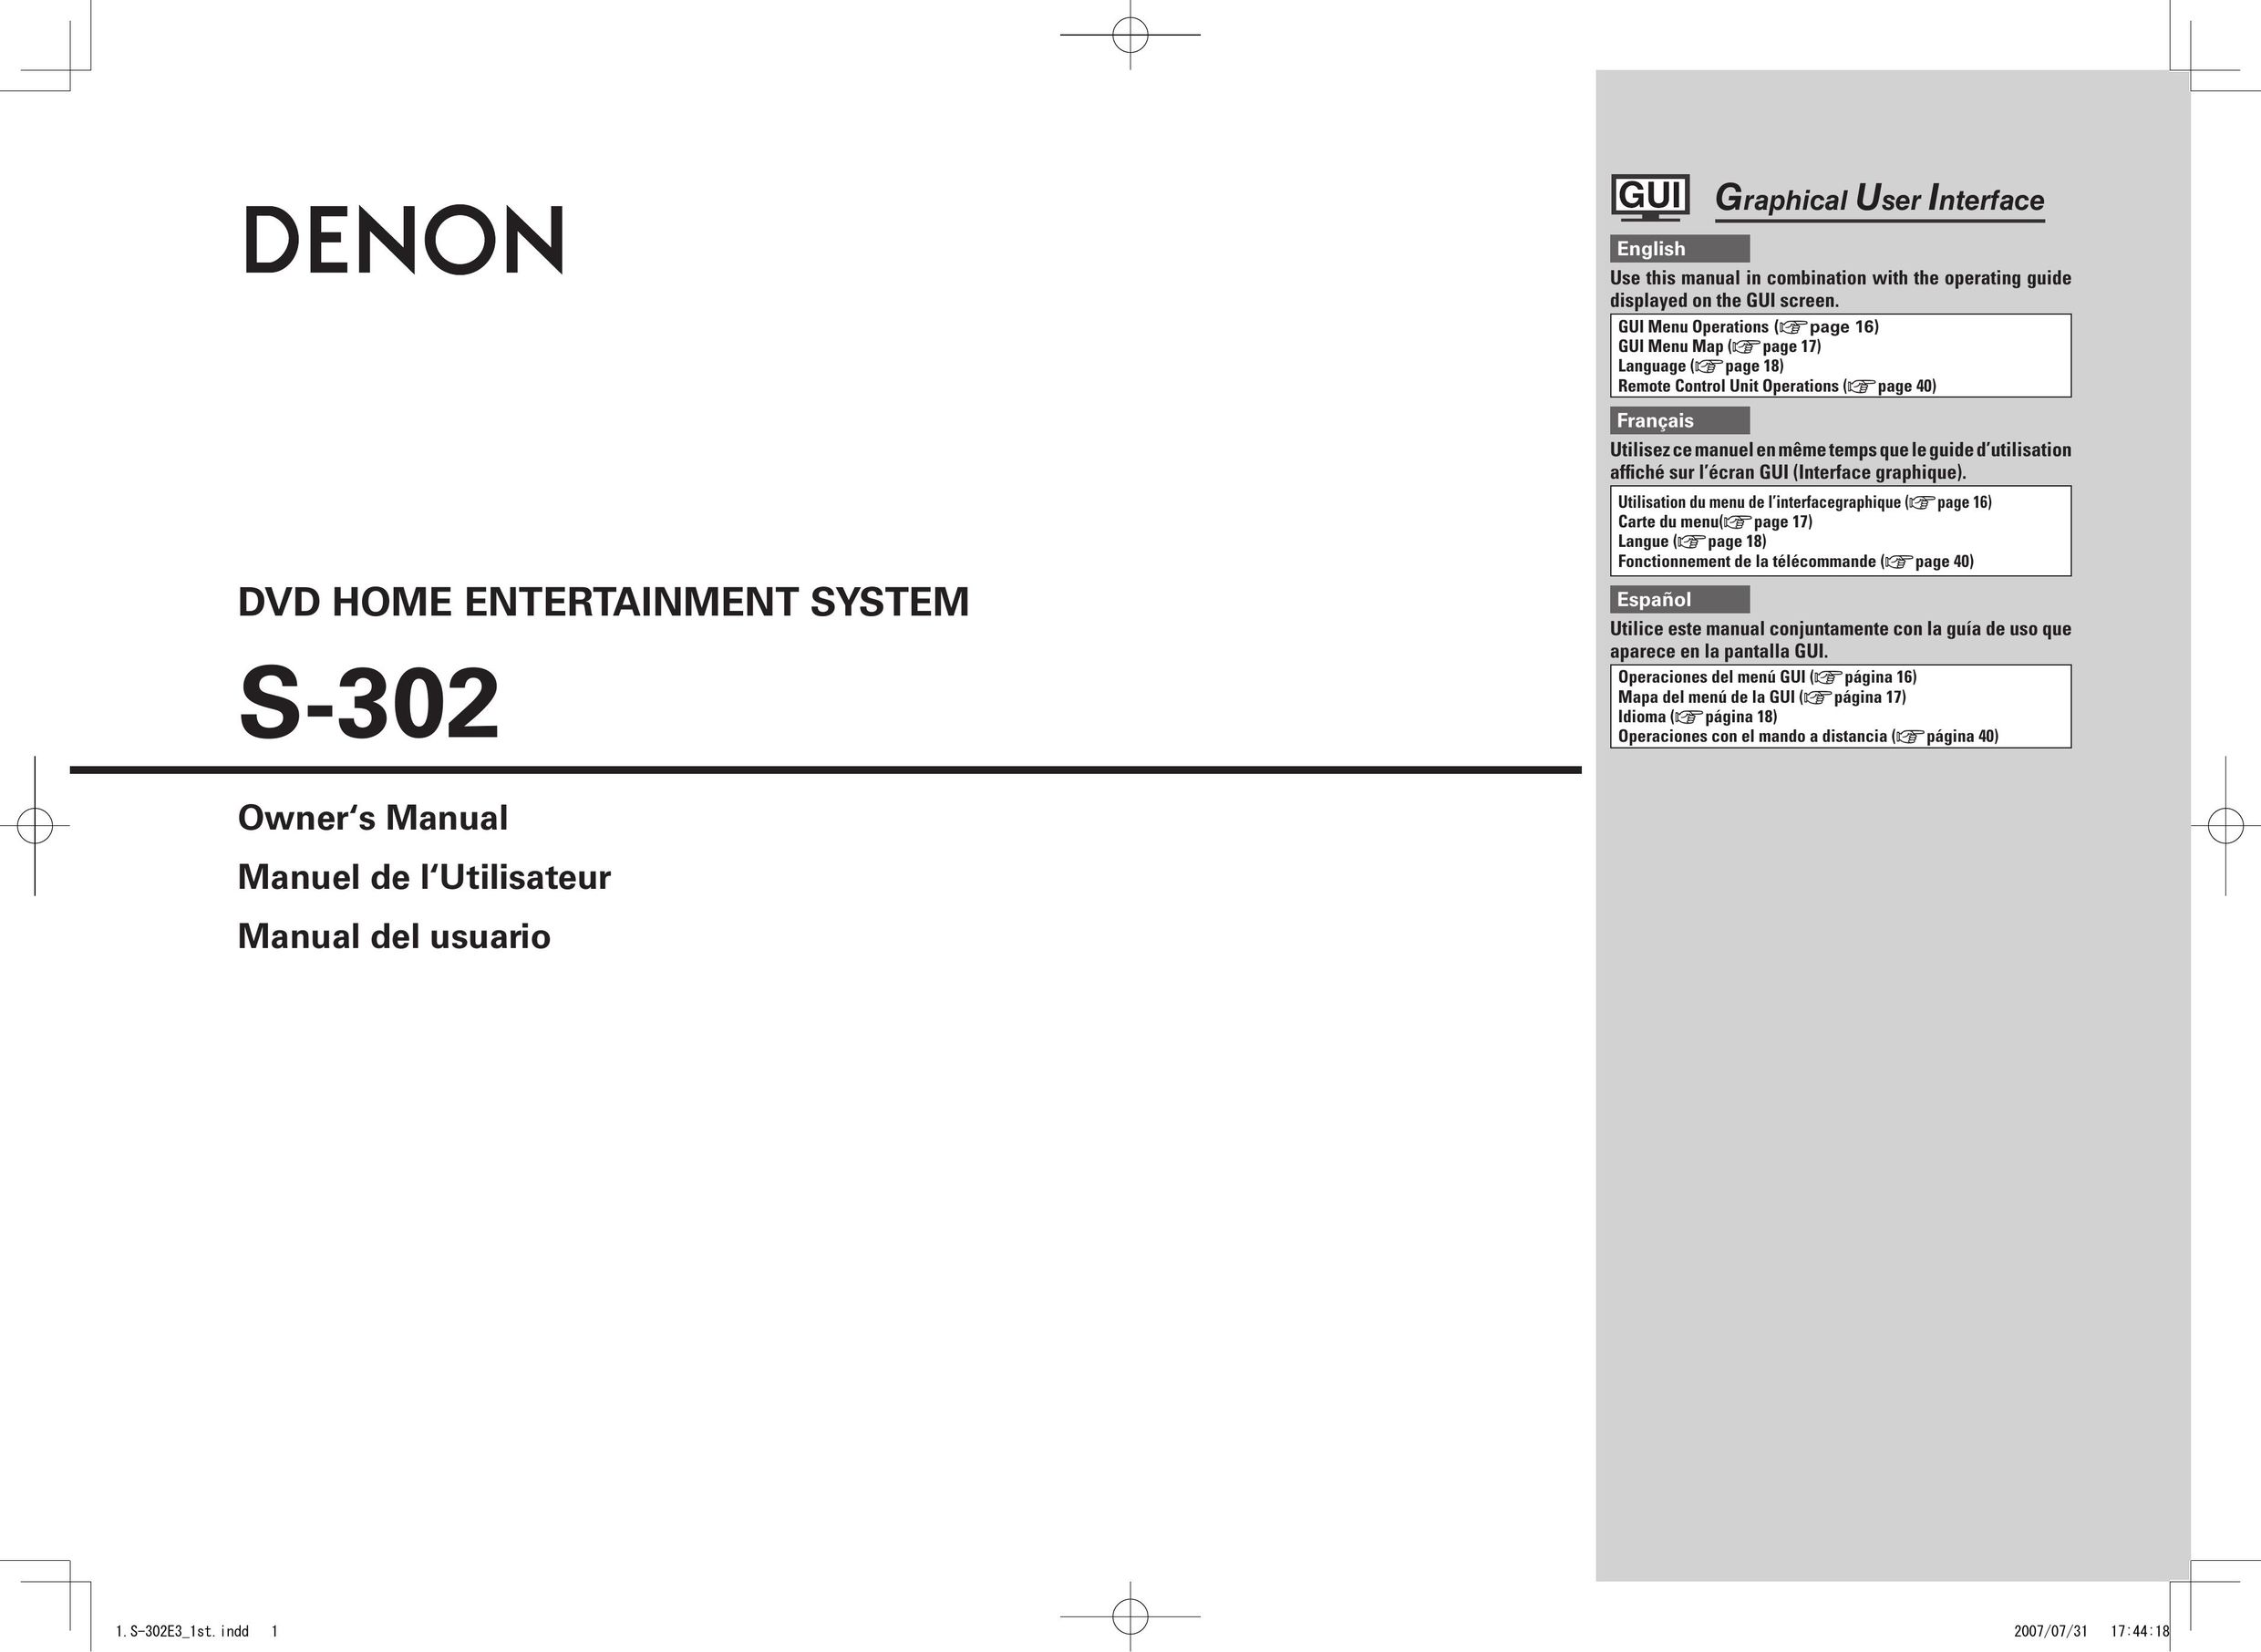 Denon S-302 Home Theater System User Manual